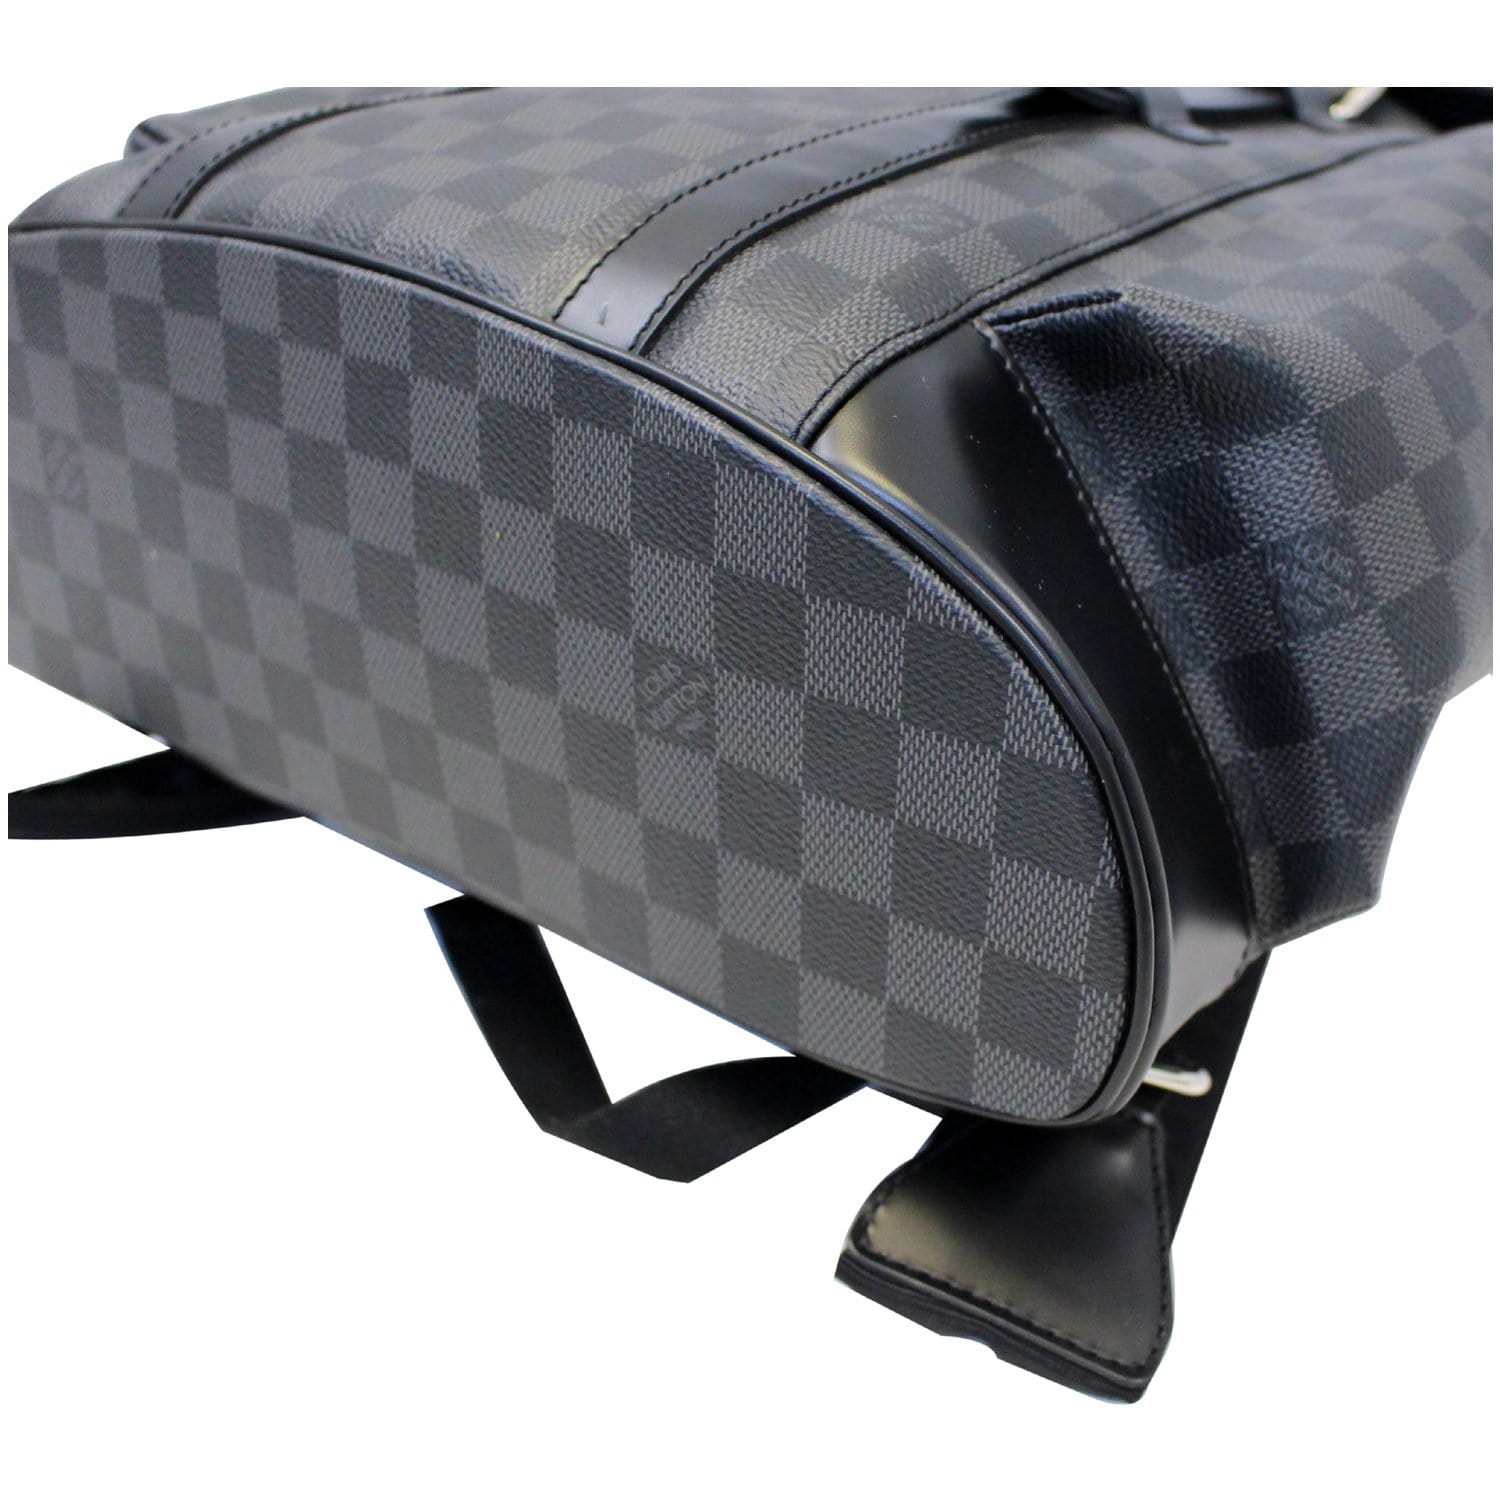 Louis Vuitton Christopher Pm Damier Graphite - For Sale on 1stDibs